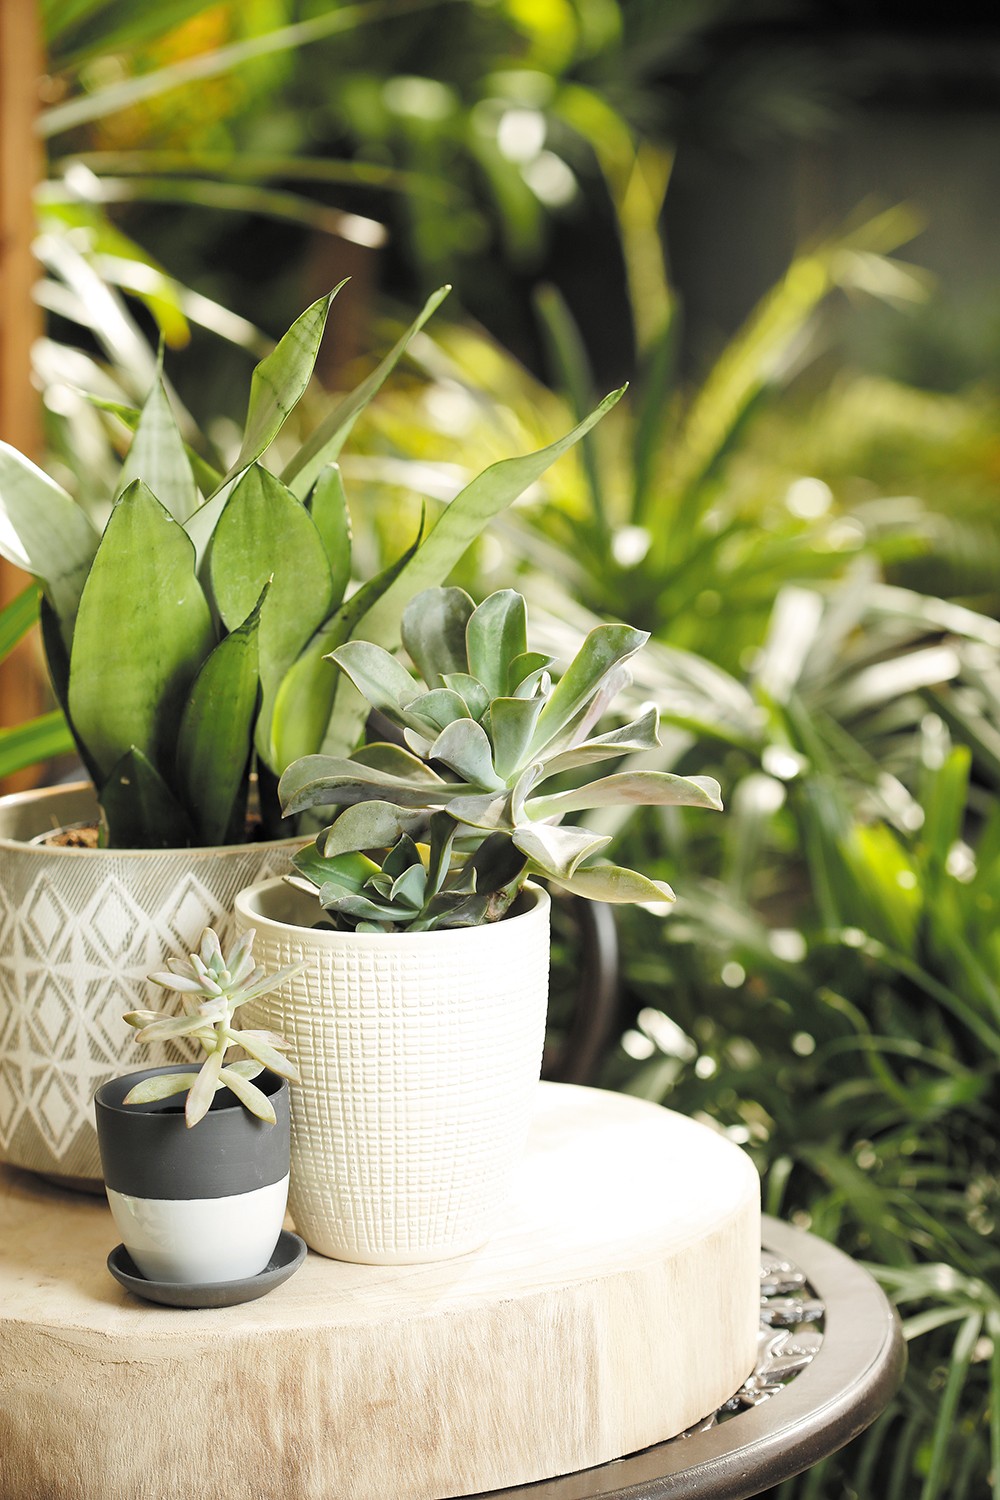 Green Houses: Put some life in your home with these local plant shops and florists